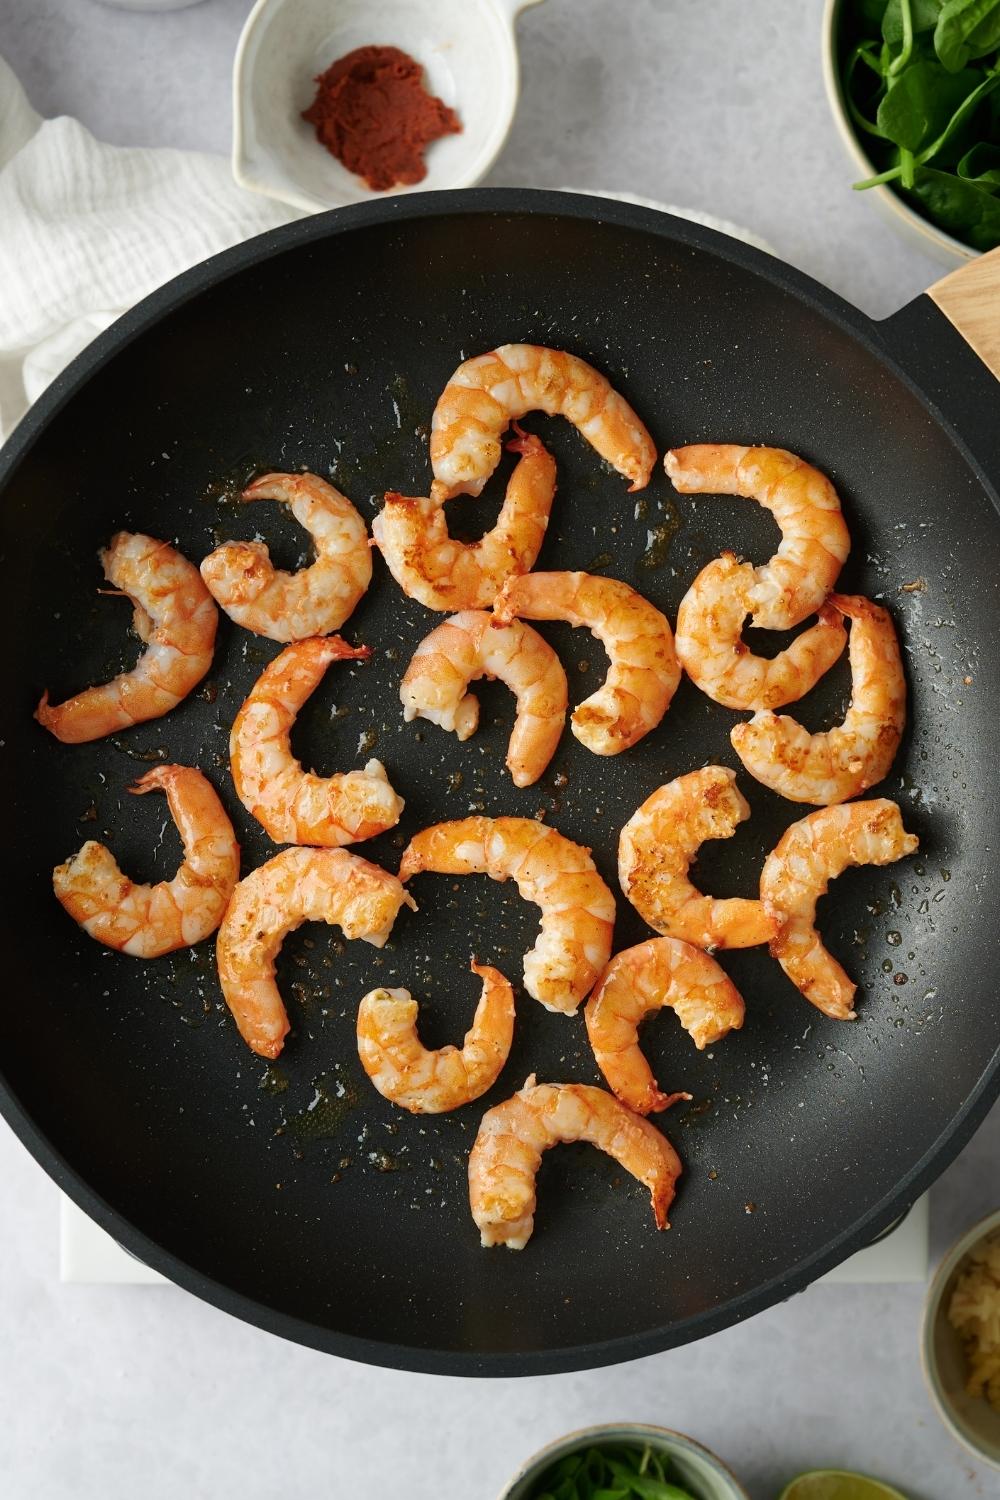 A hot pan with oil and cooked shrimp.